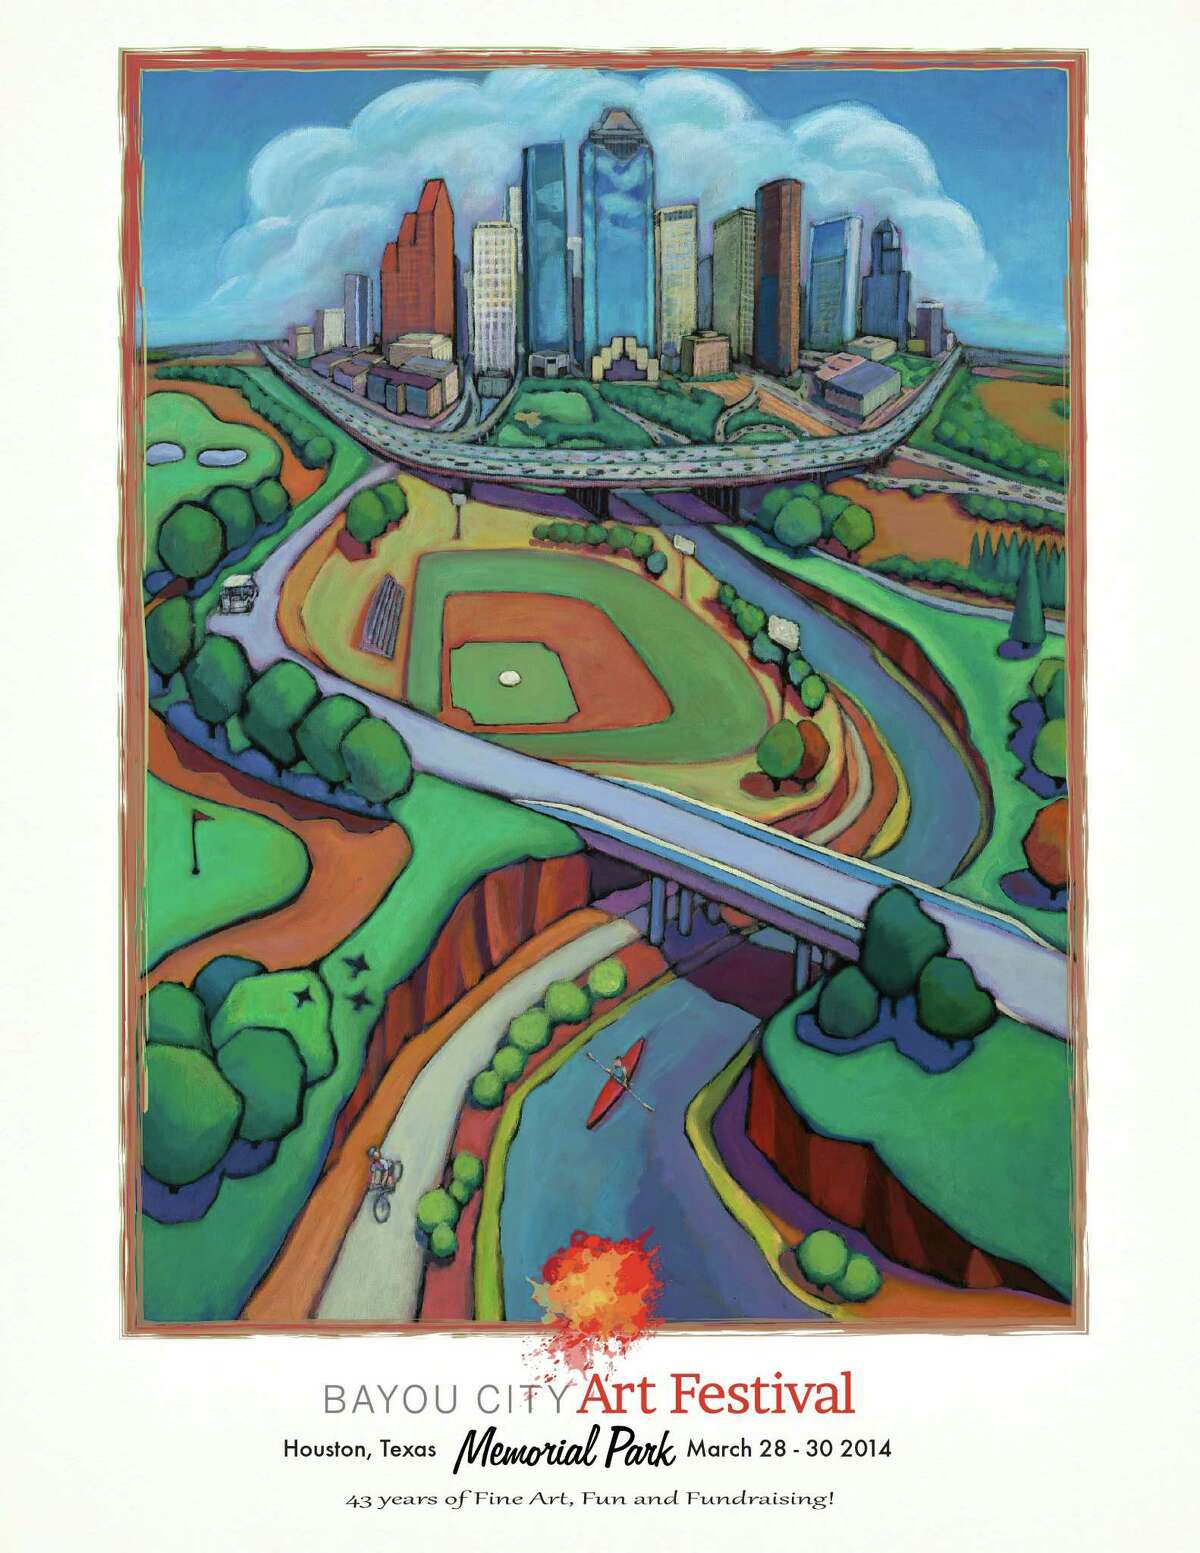 The 2014 Bayou City Art Festival poster features a painting of Houston's skyline and Memorial Park by artist Daniel Ng.